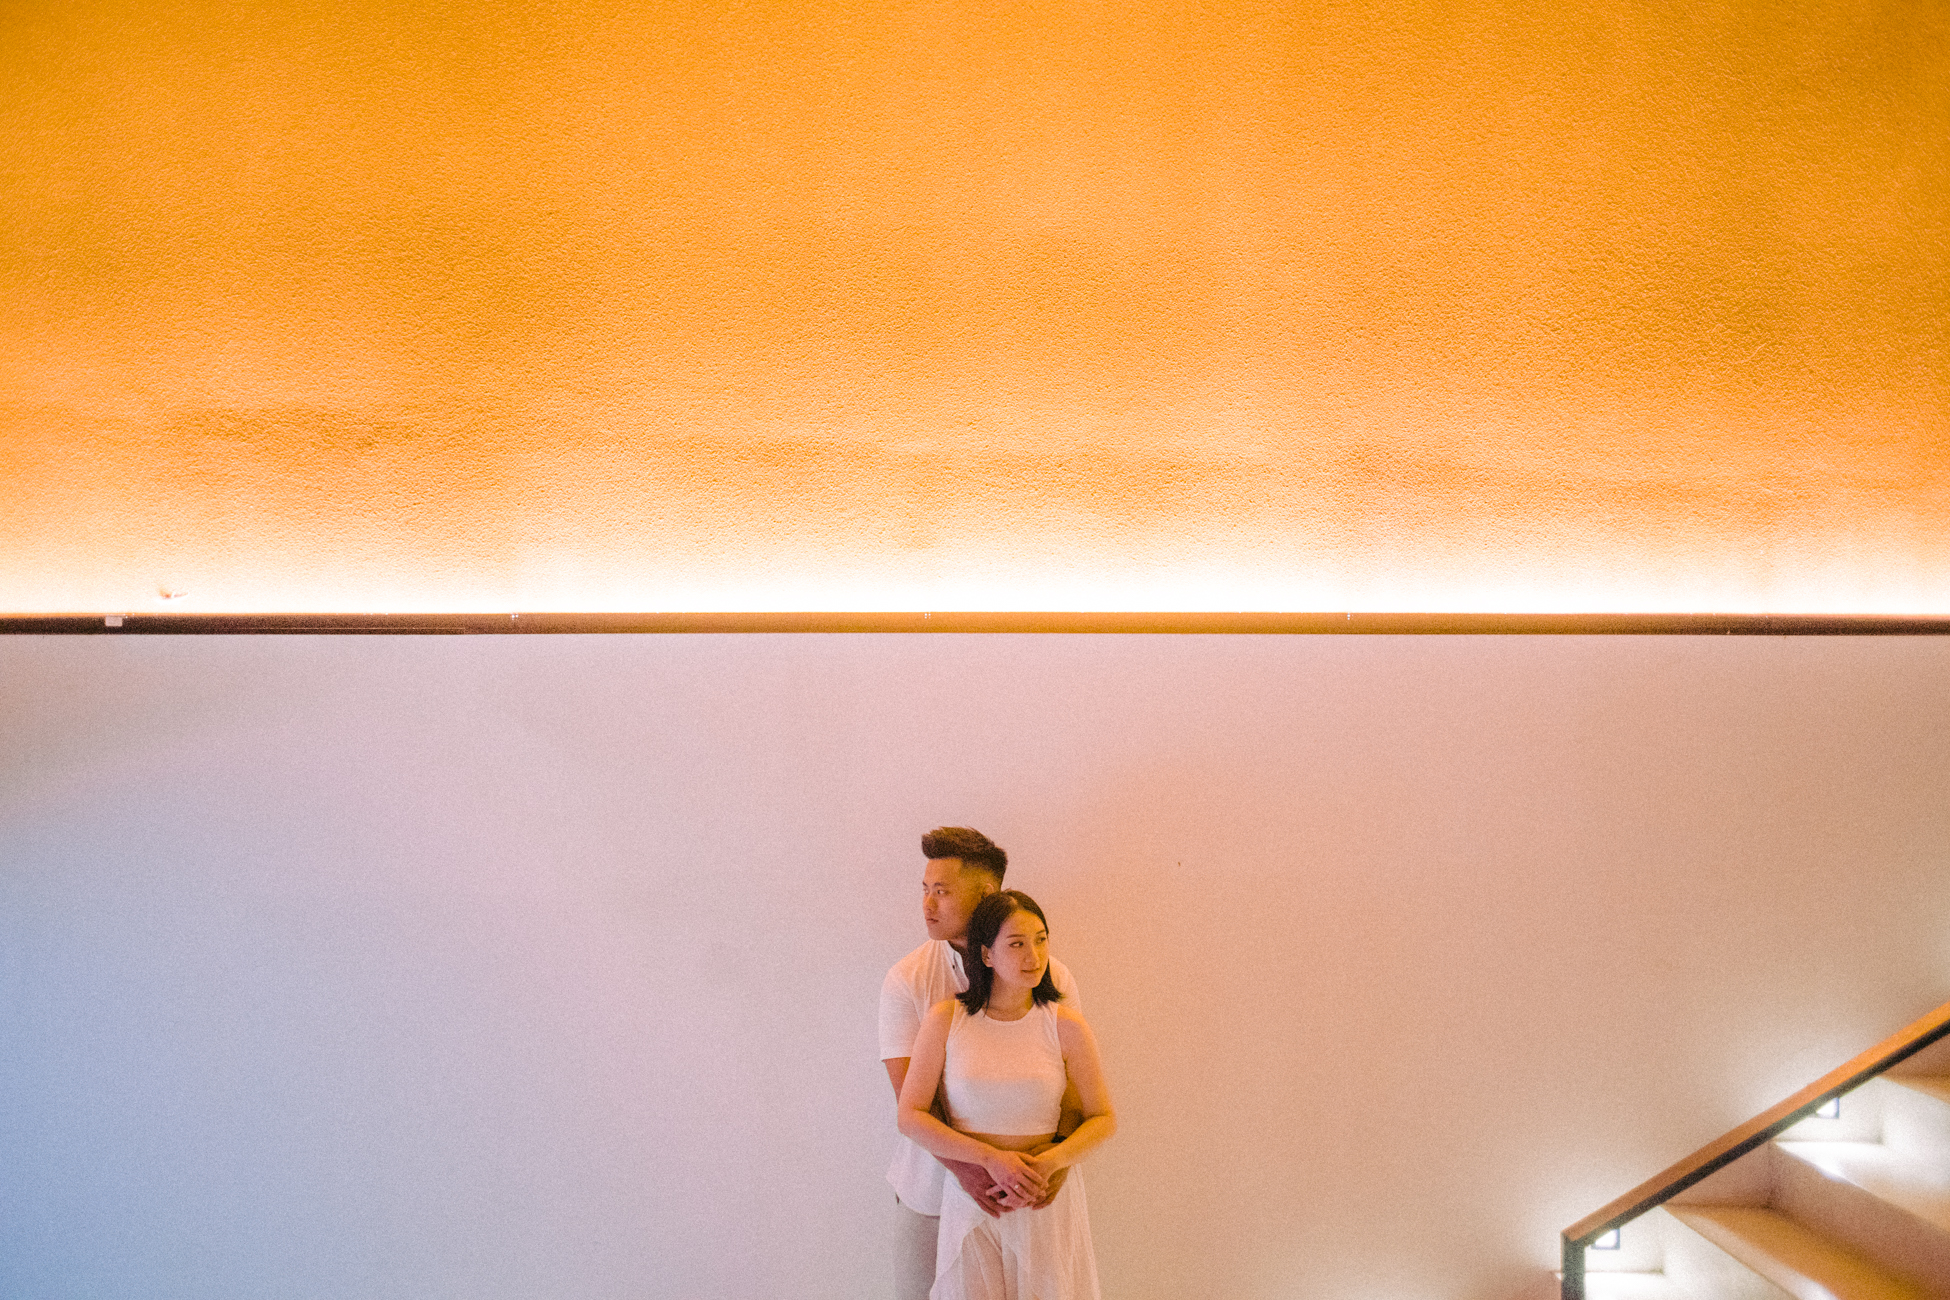 The couple standing in the entrance lobby at Cafe del Mar Bali in warm light